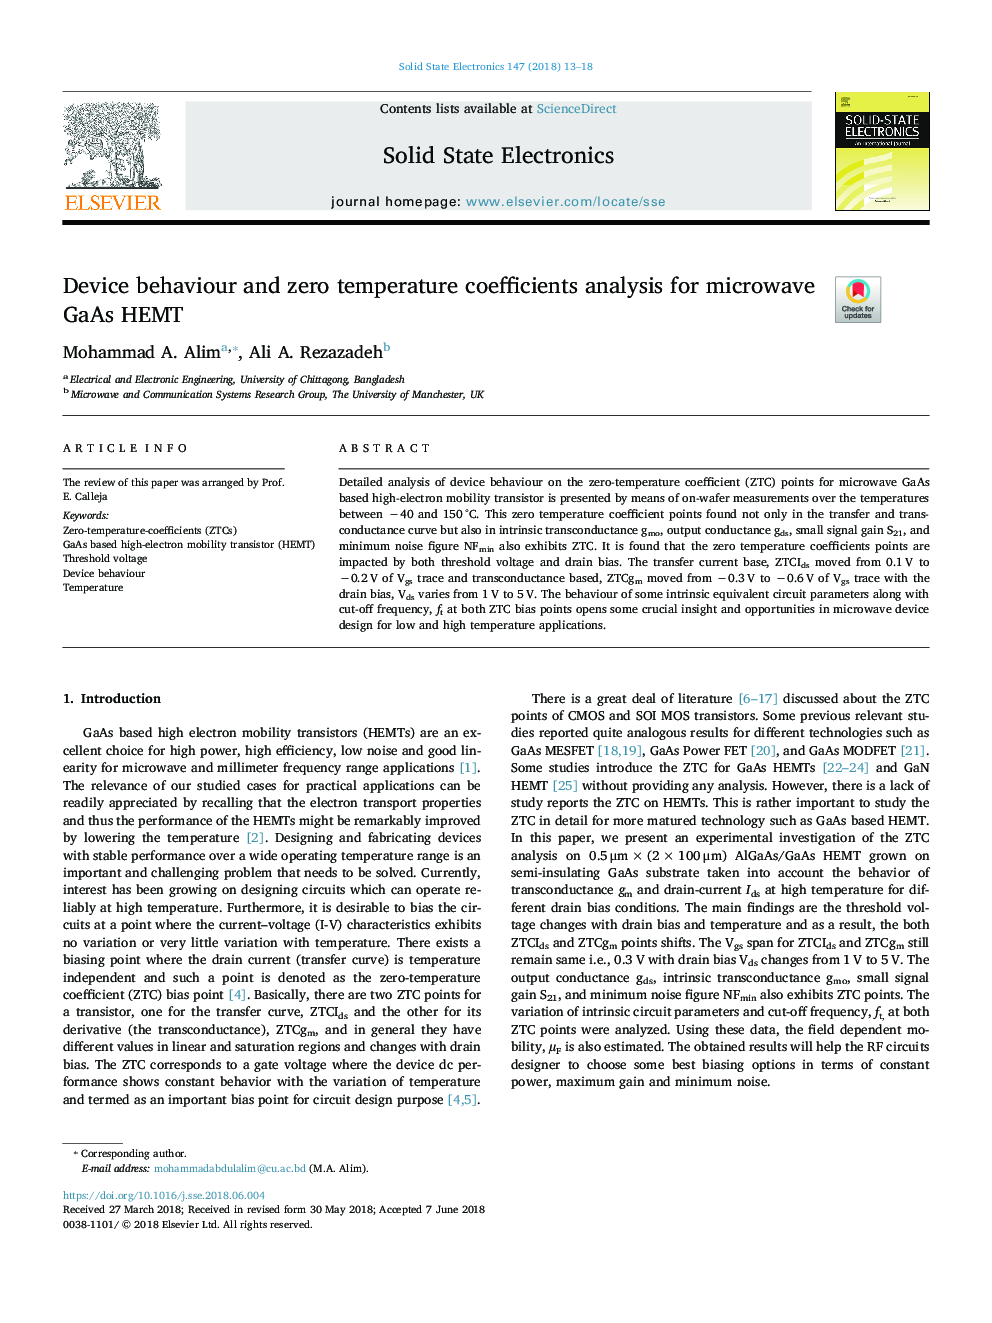 Device behaviour and zero temperature coefficients analysis for microwave GaAs HEMT